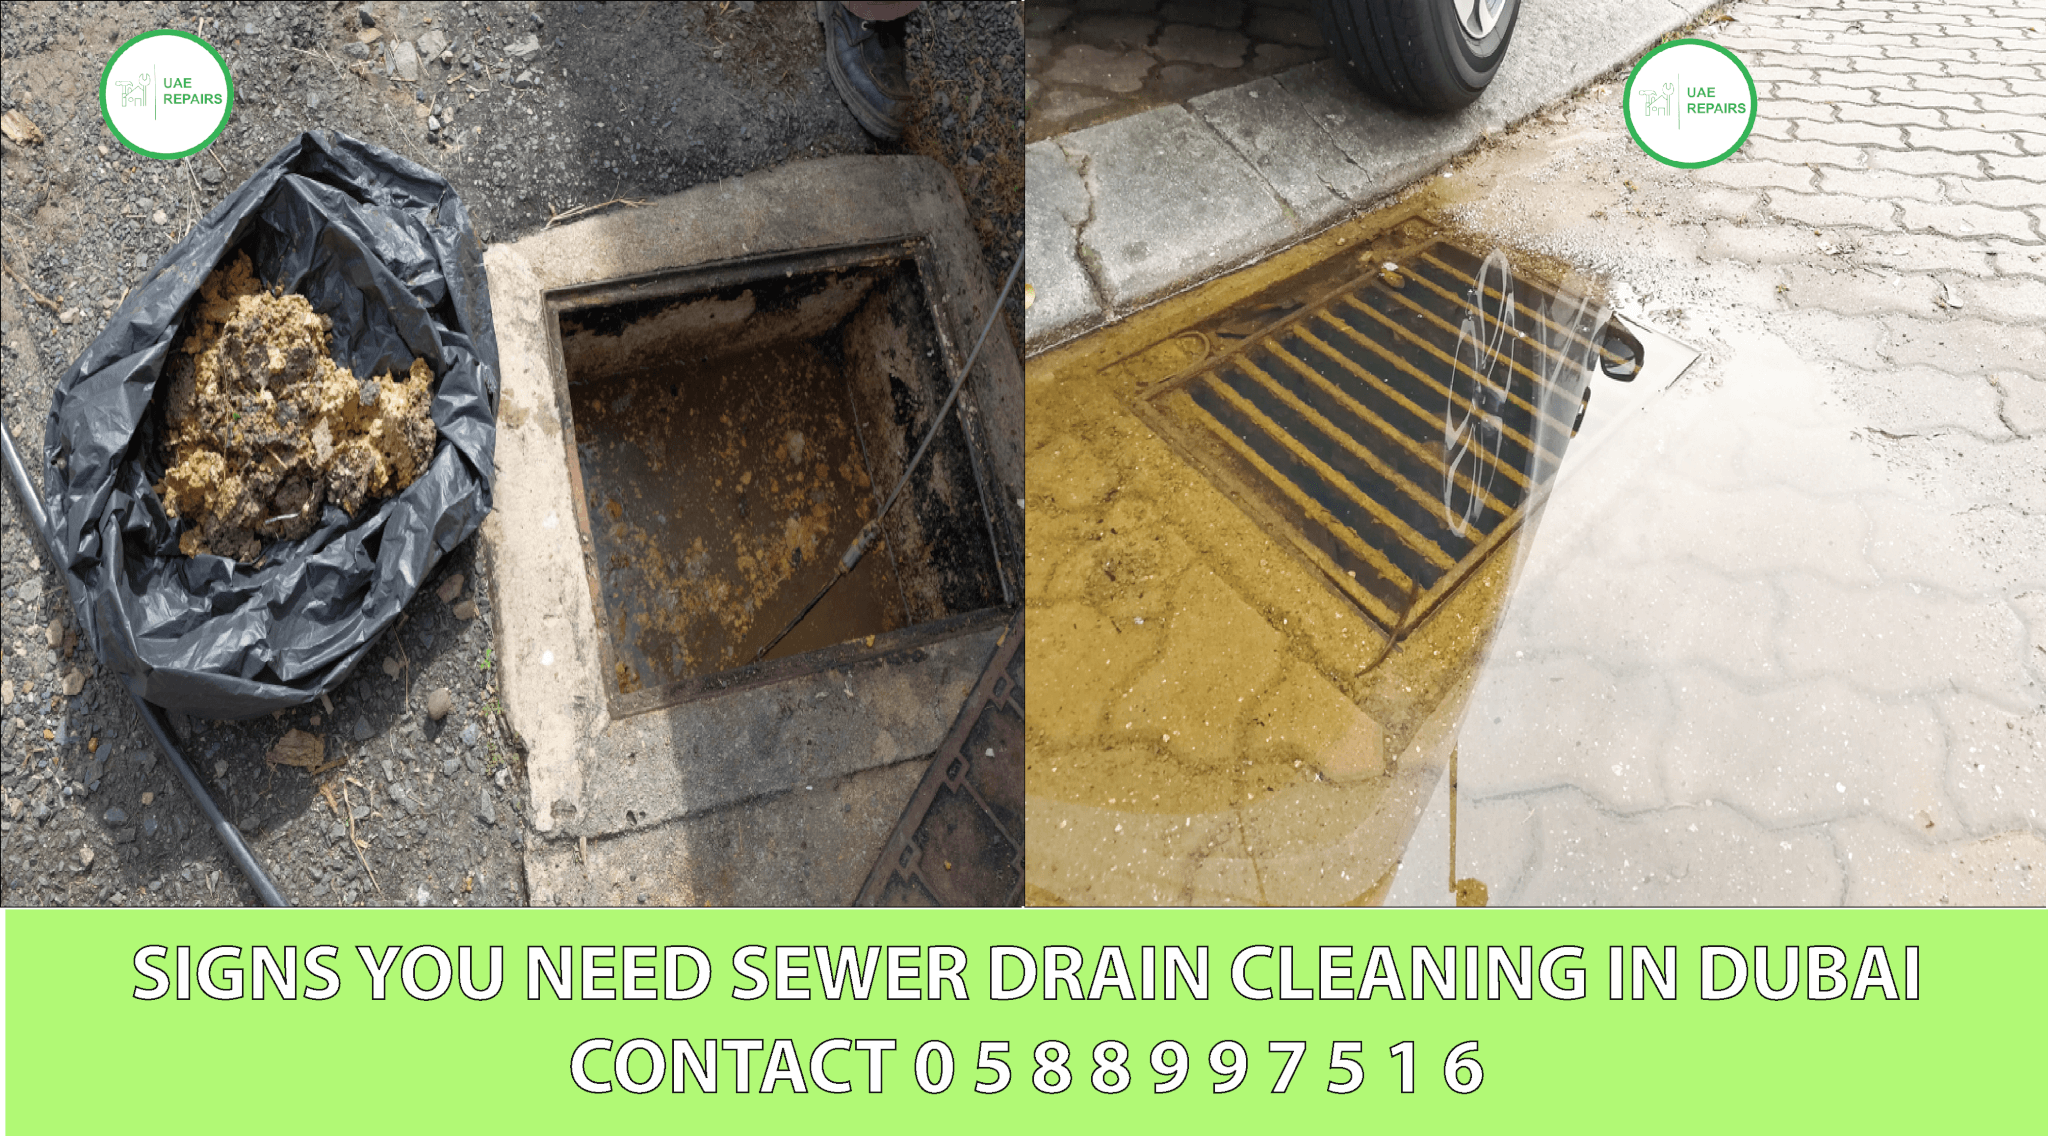 UAE REPAIRS SIGNS YOU NEED SEWER DRAIN CLEANING